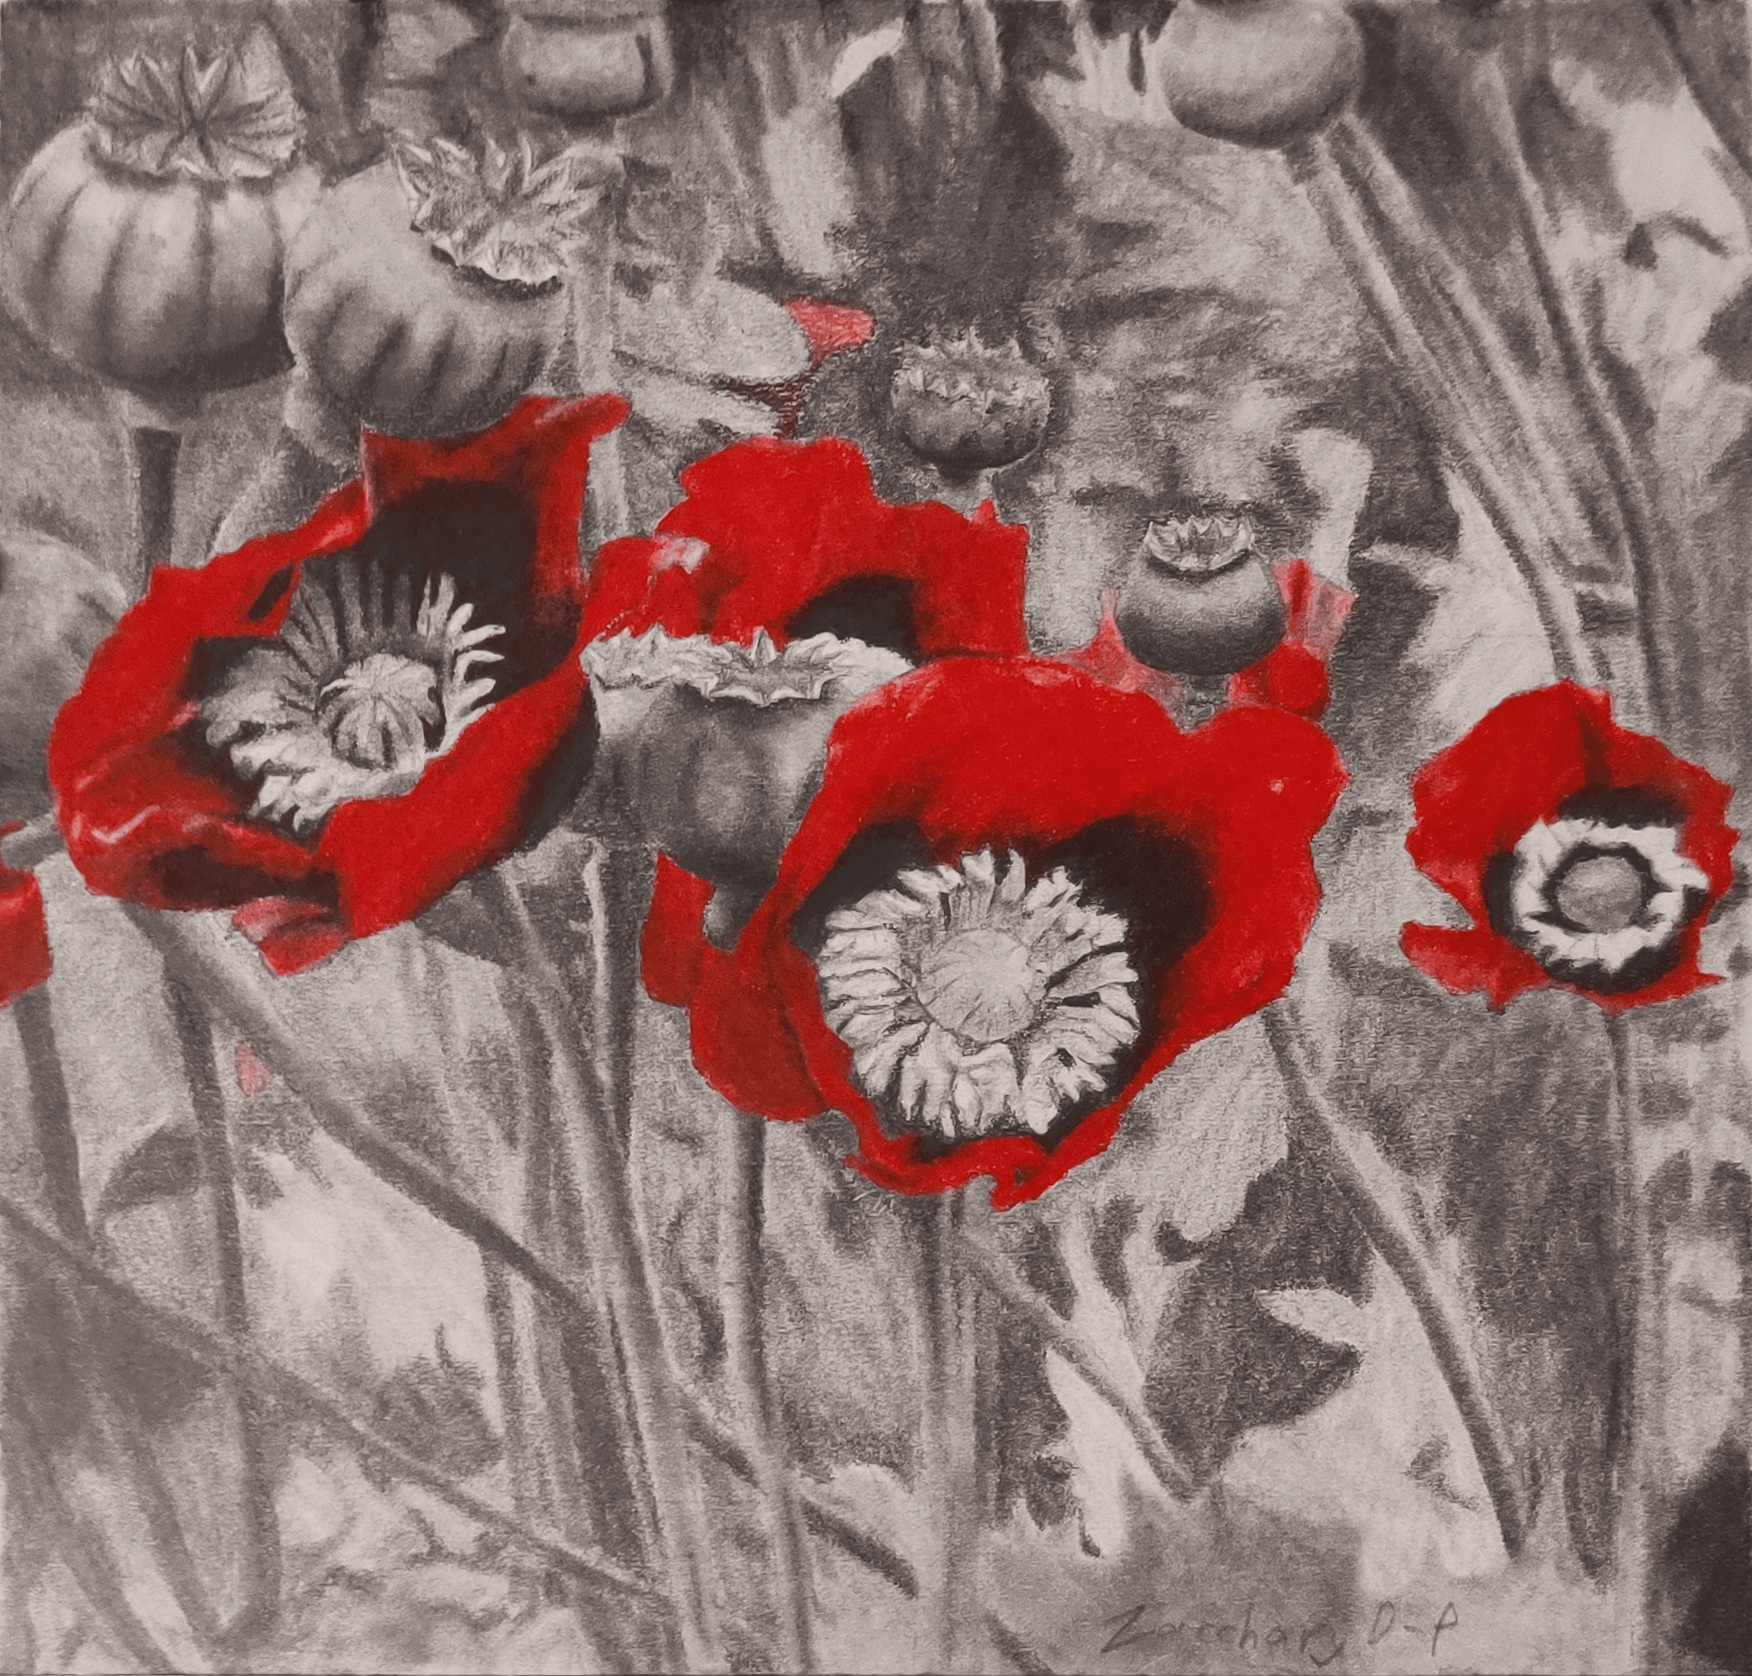 A pencil drawing of opium poppies, except the red of the poppies is done in red pencil crayon to stand out and create contrast.